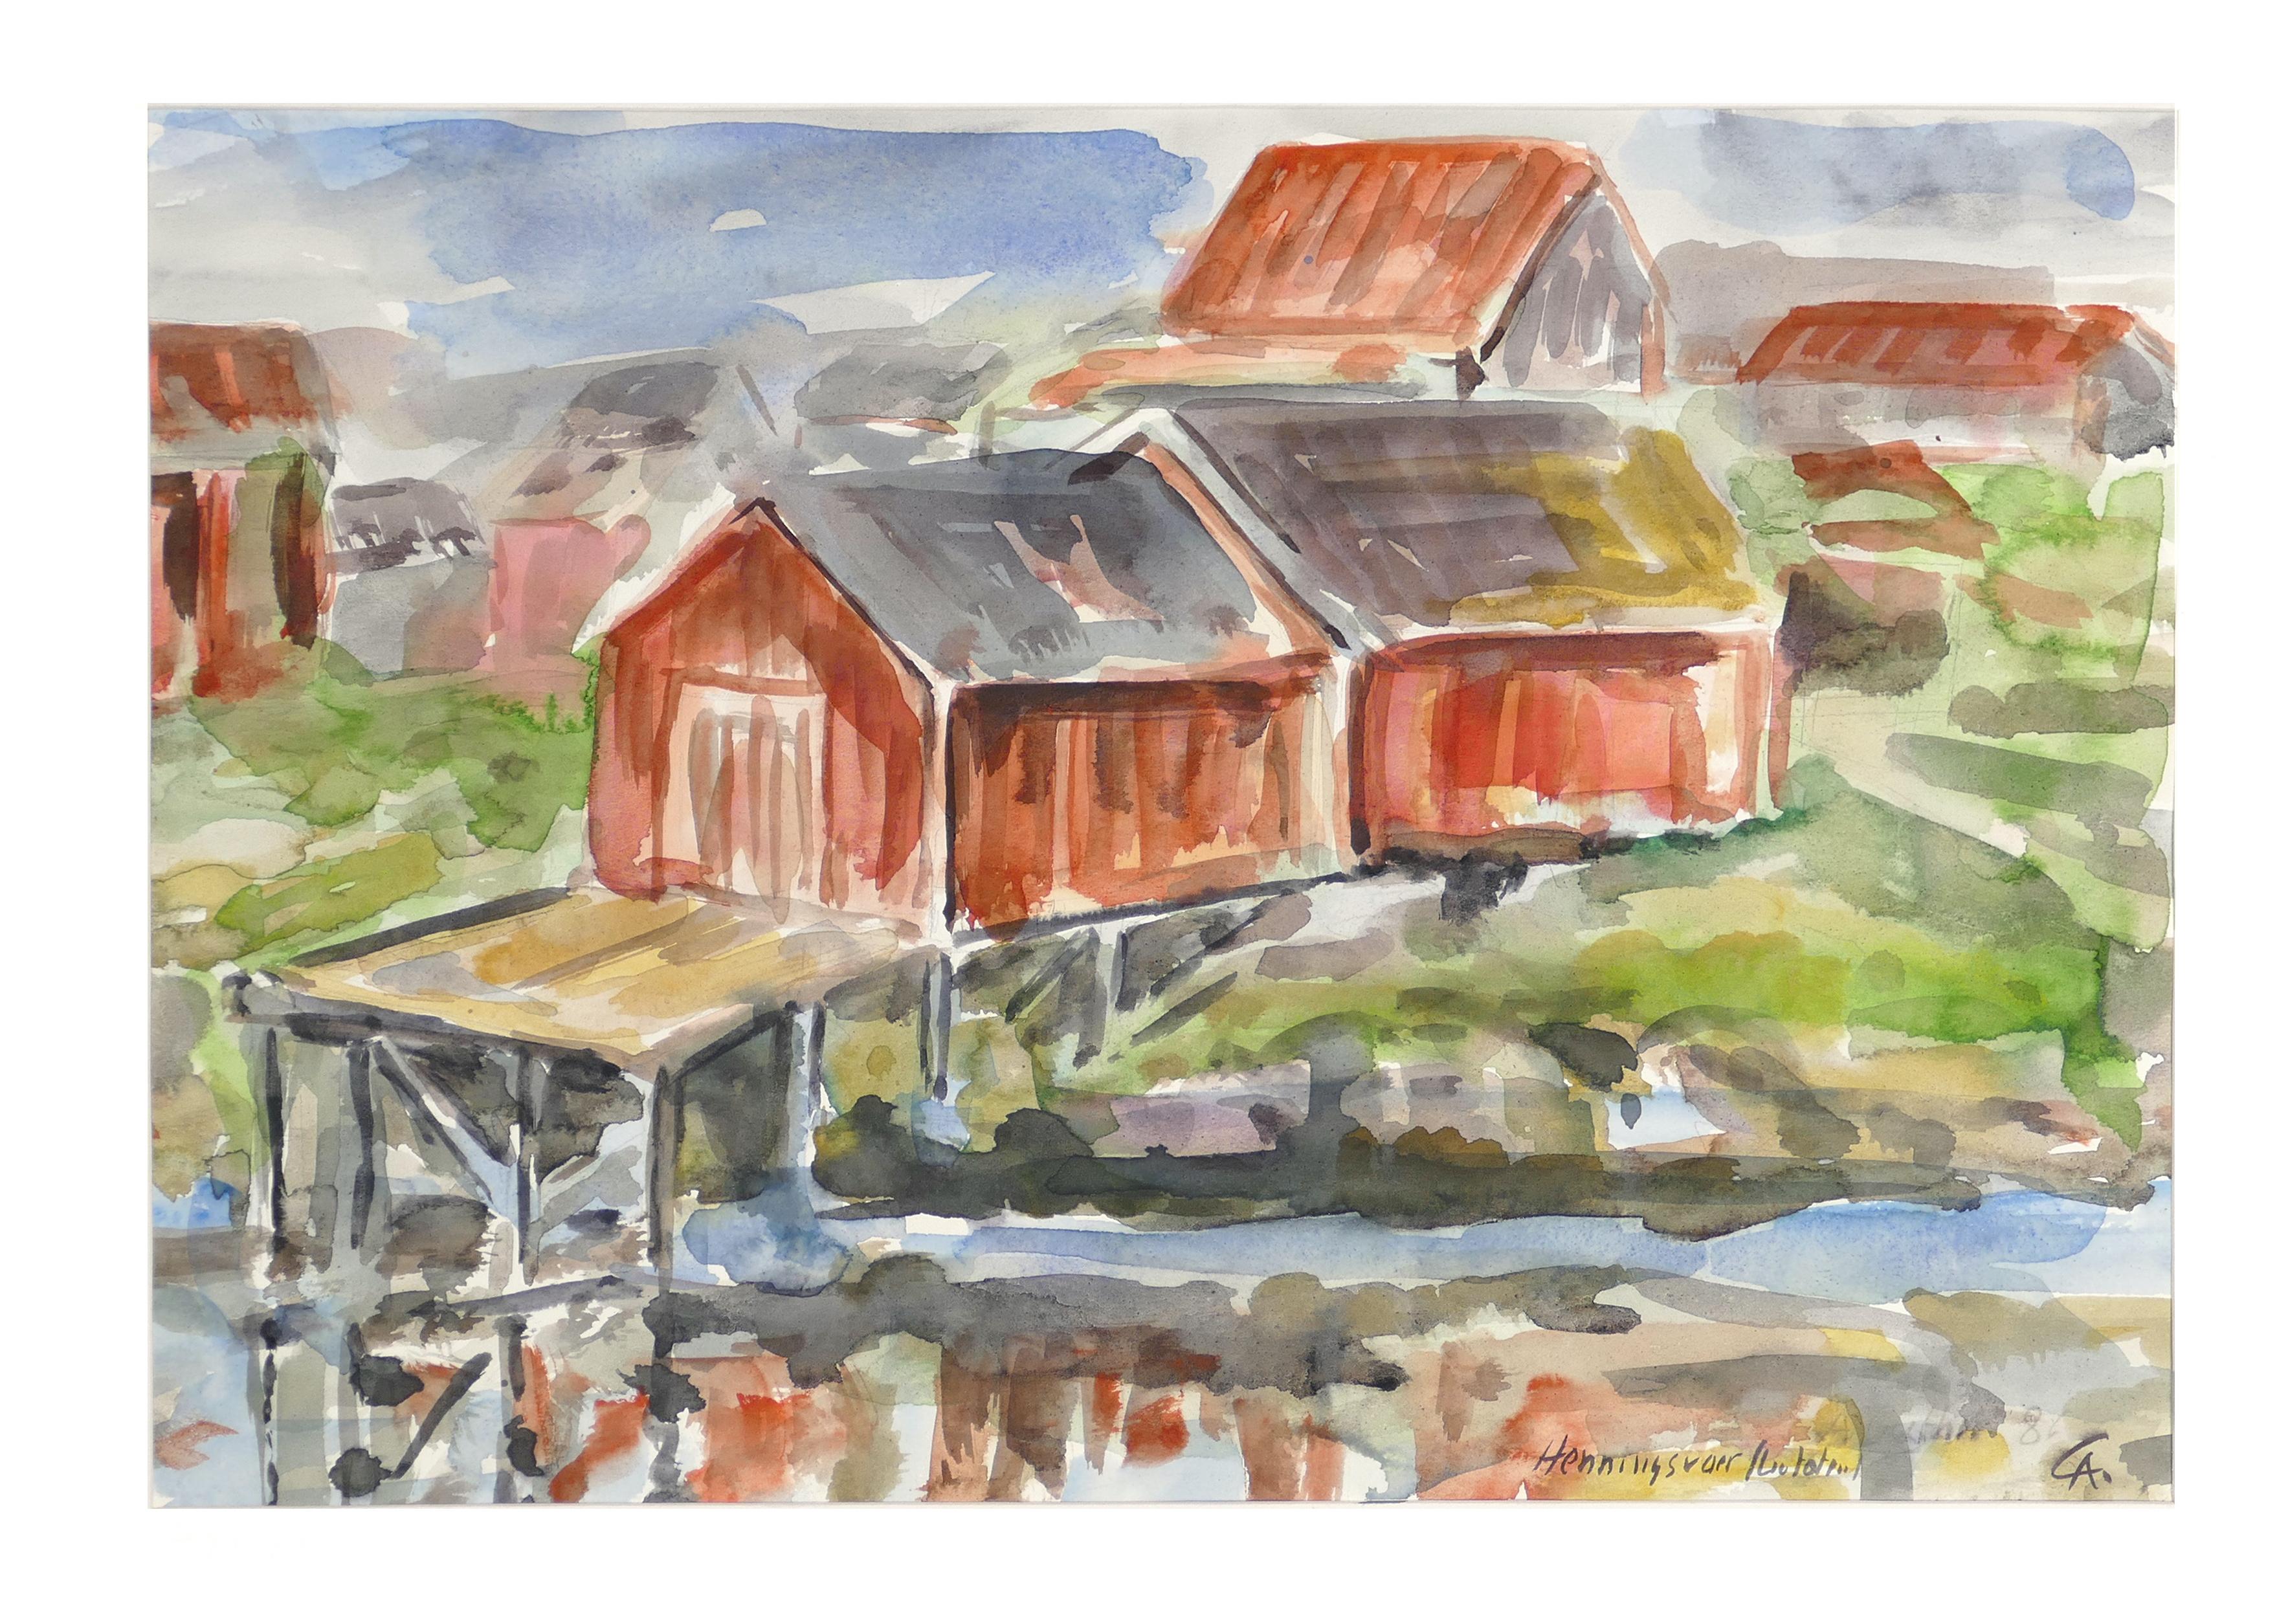 Wooden Huts - Original Watercolor by Armin Guther - 1986